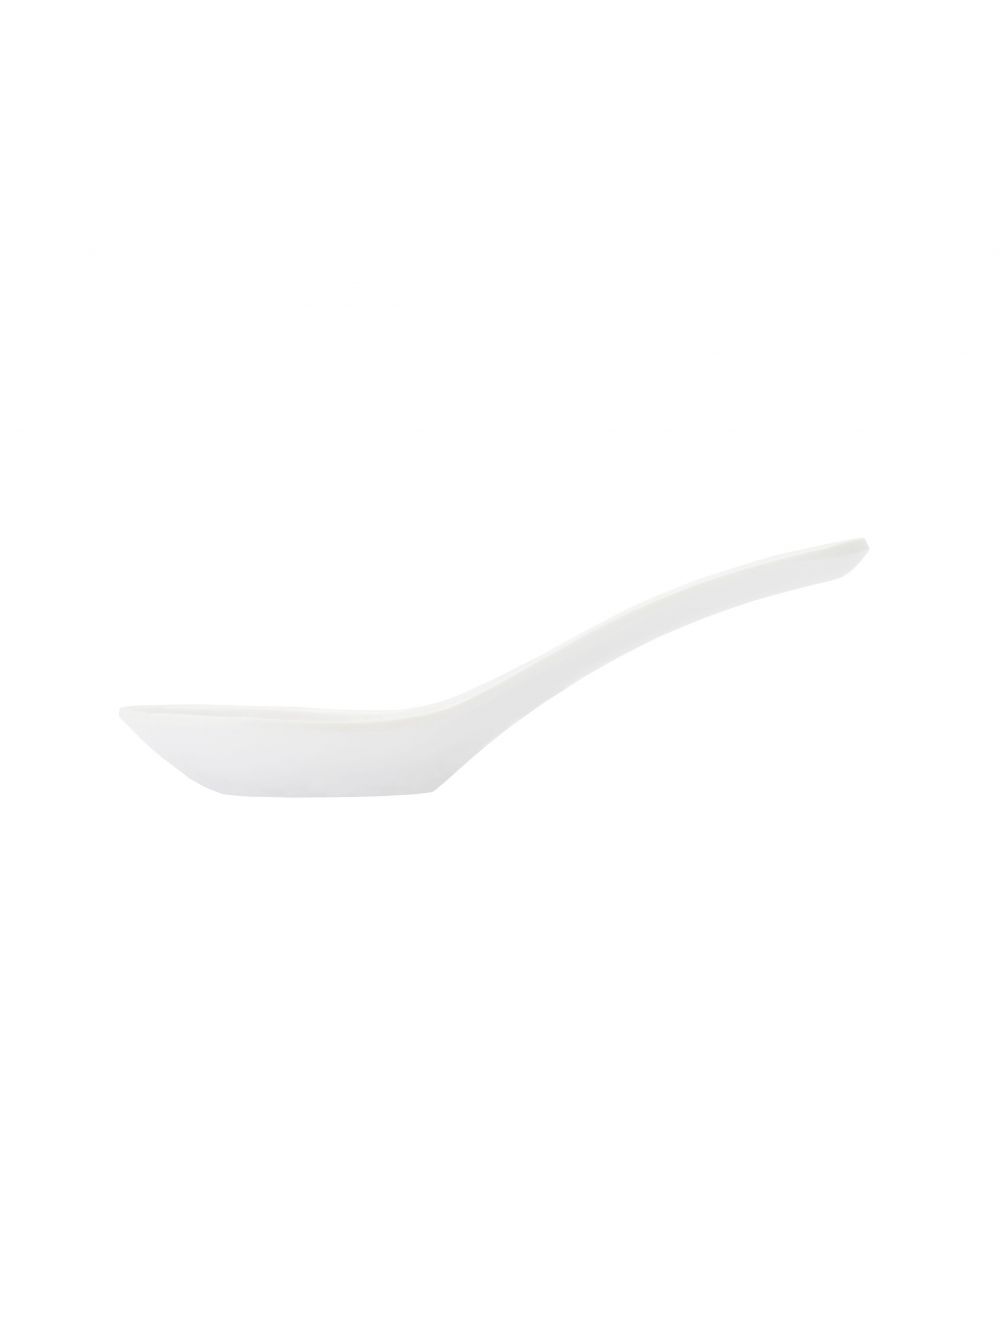 Dinewell Melamine Soup Spoon Green Bamboo-DWS5111GB